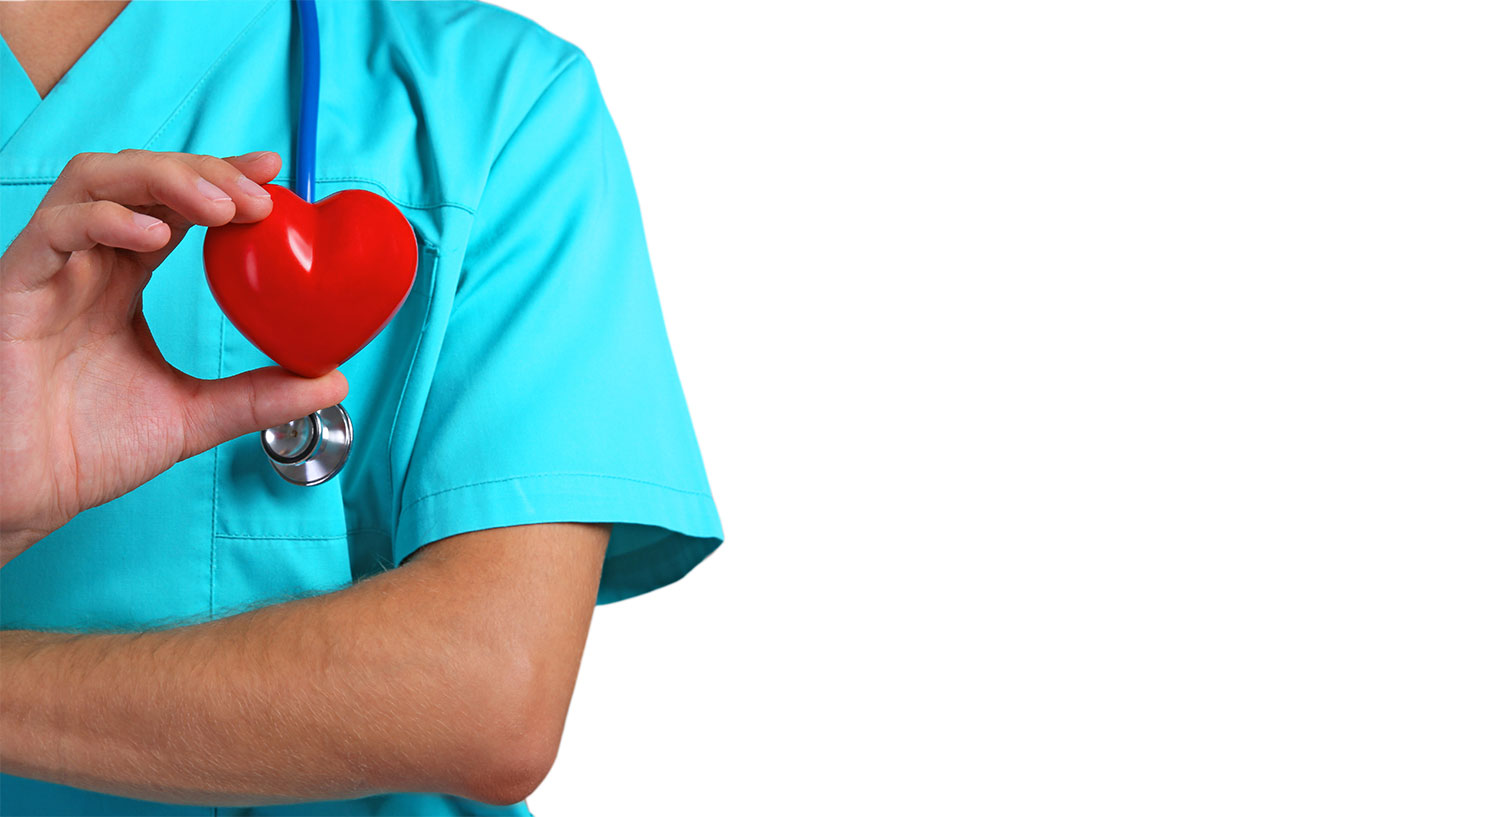 Nurse wearing blue scrubs and stethoscope holding a red heart in their hand